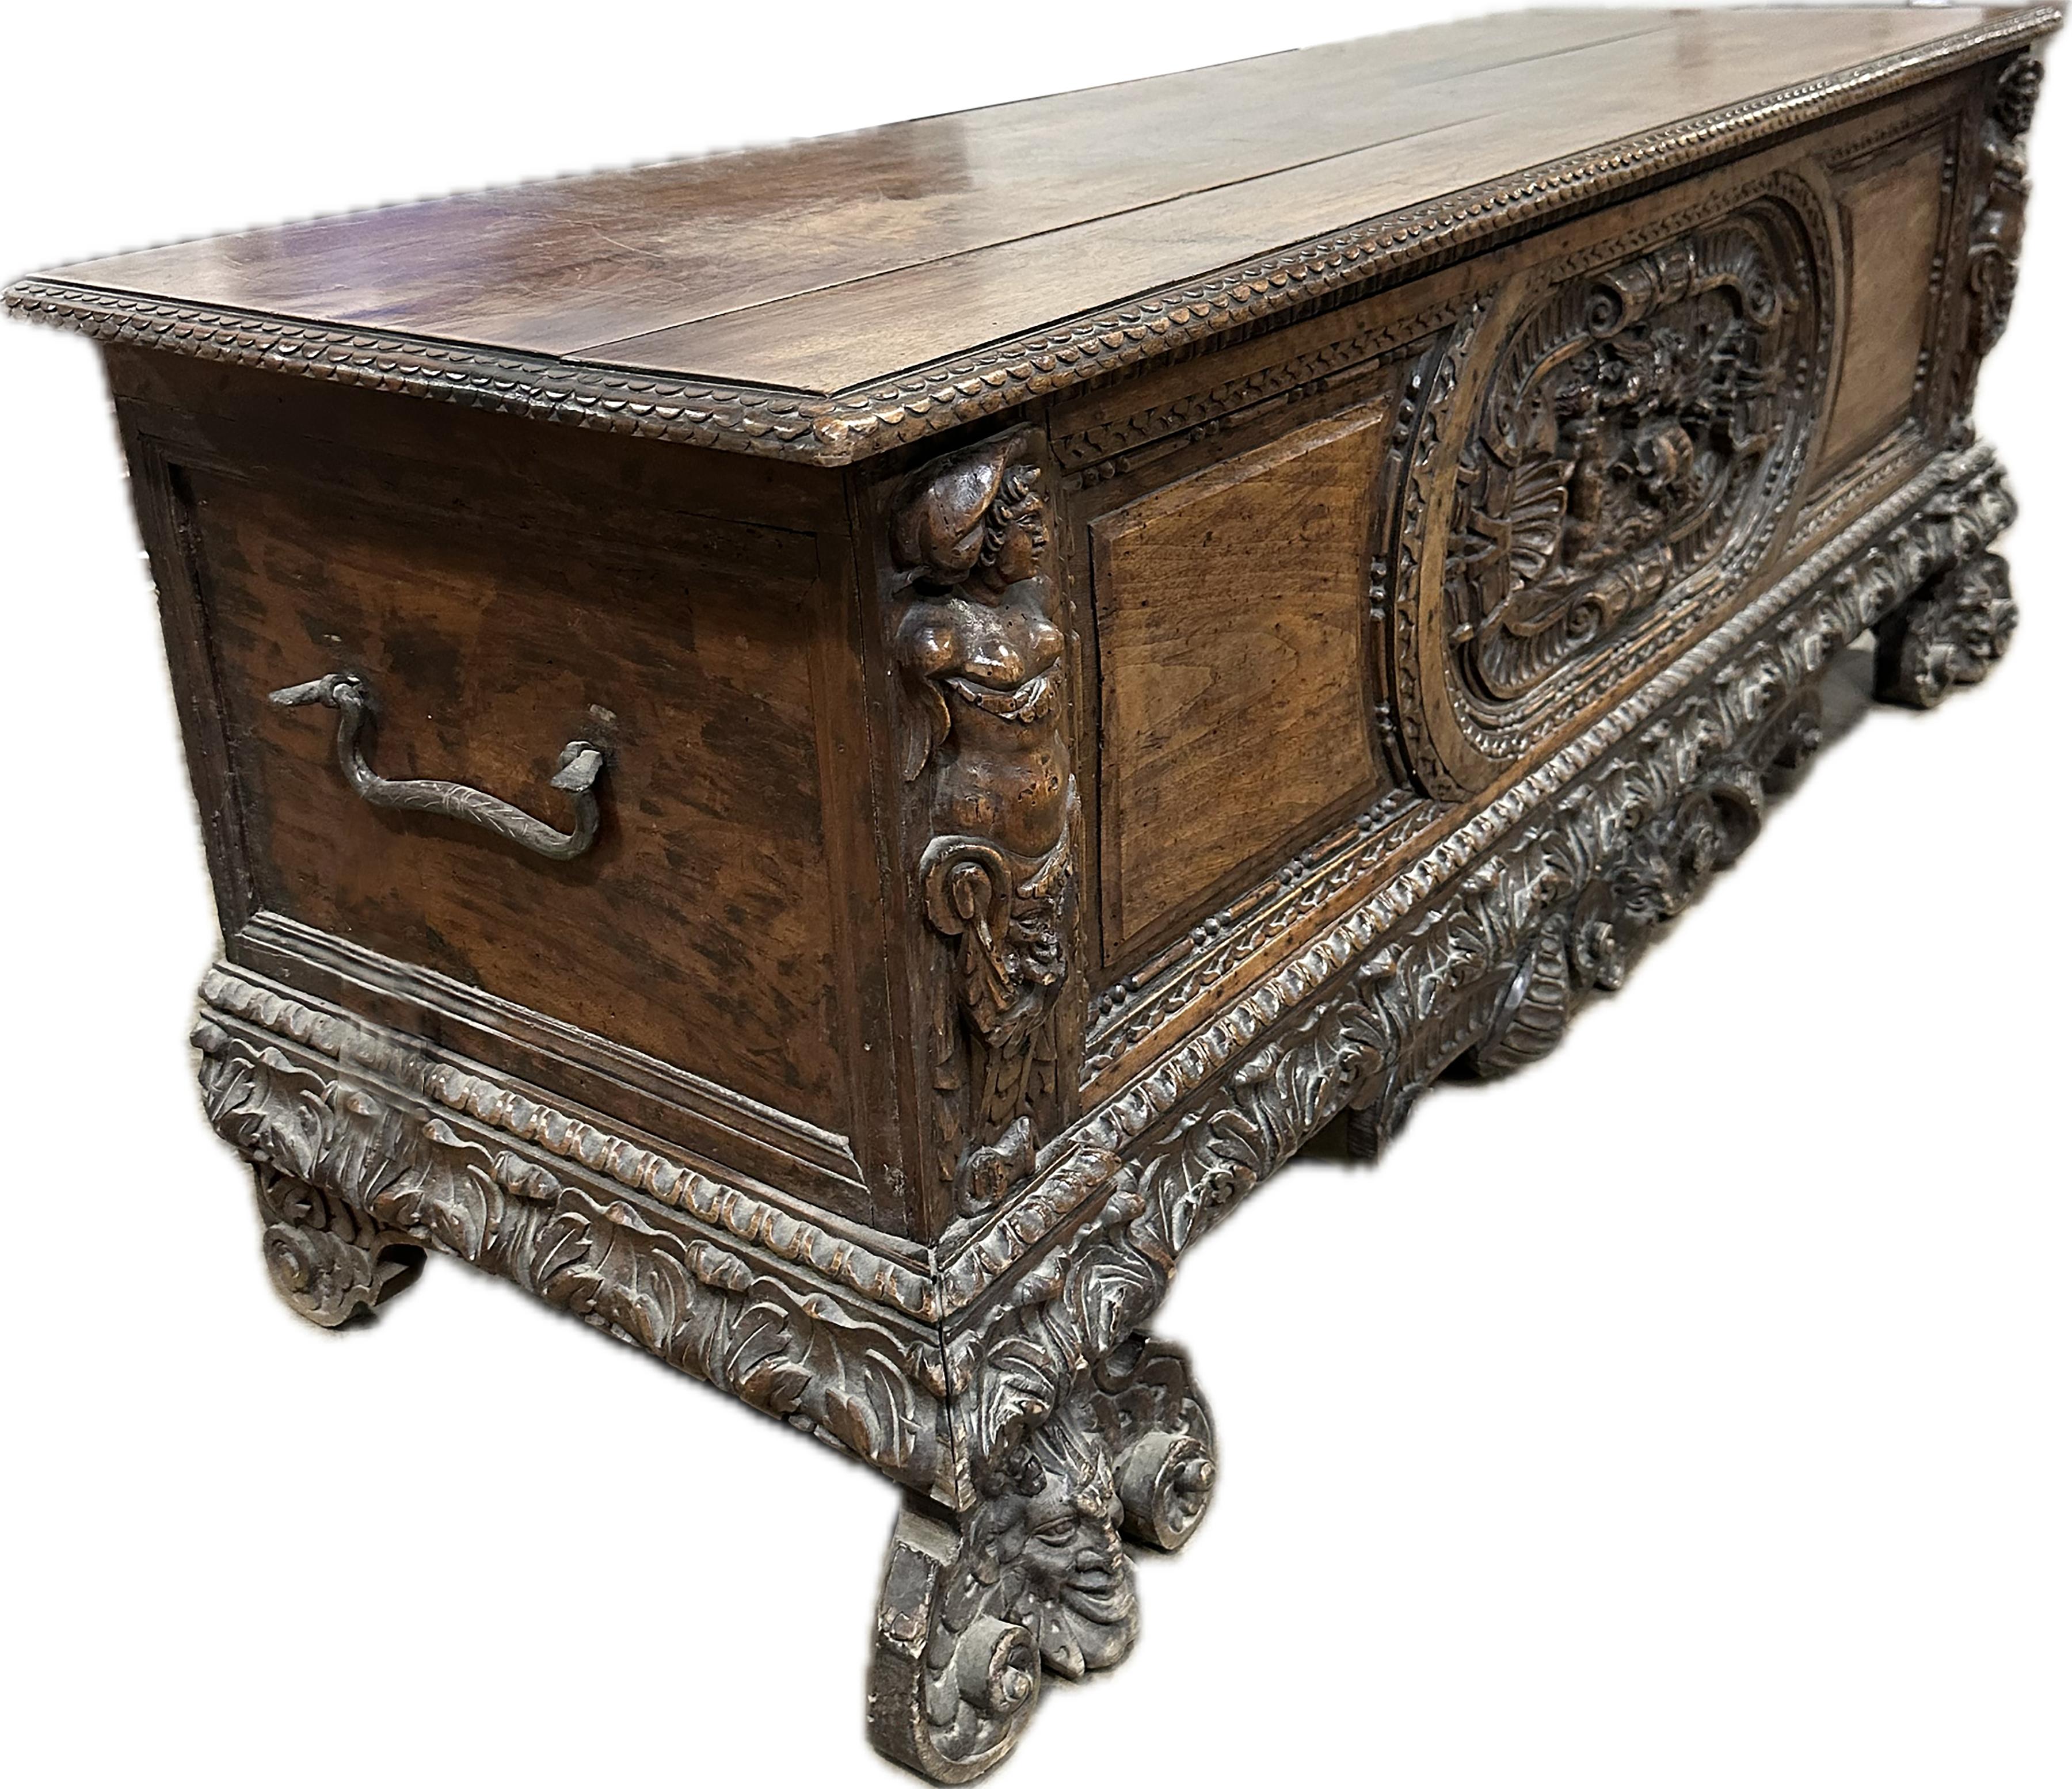 A handsome wide Italian walnut Cassone. Intricately carved gothic style narrative carvings on the front along the side, bottom, and center. Rich patinated burnt umber color wood finish. 17th century circa 1680. 
Provenance: Originally from Newport